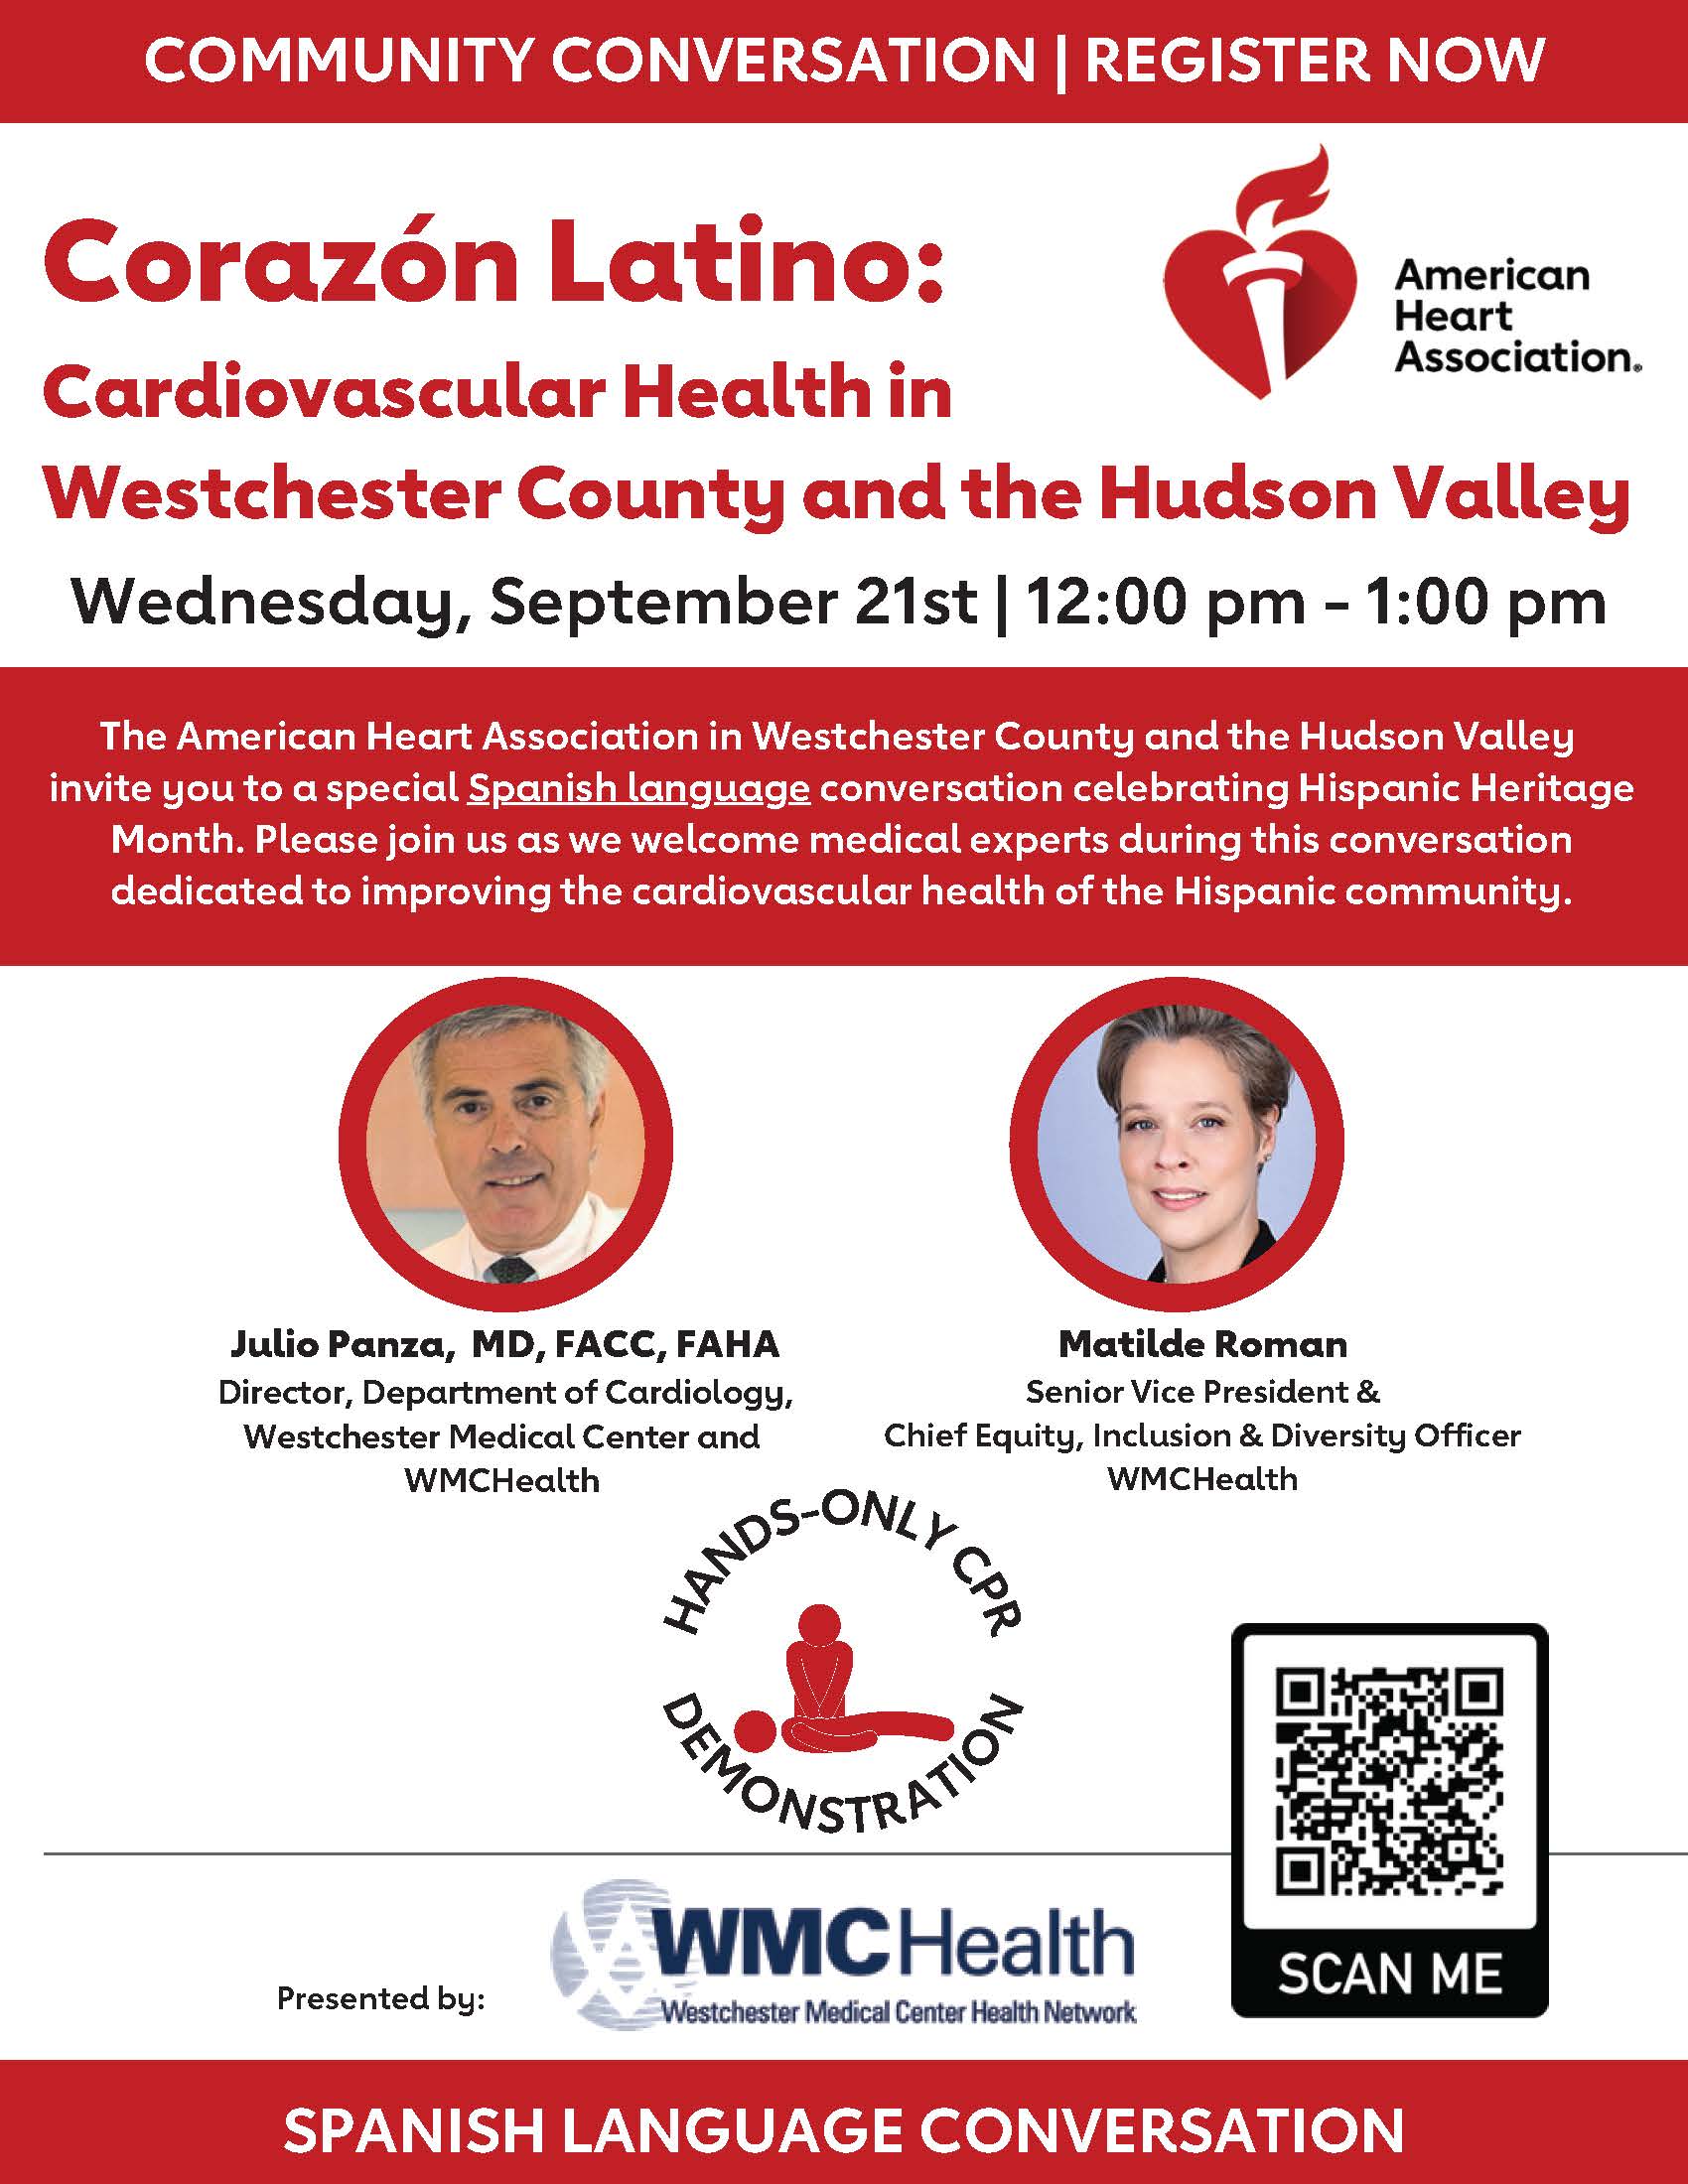 Corazón Latino: Cardiovascular Health in Westchester County and the Hudson Valley